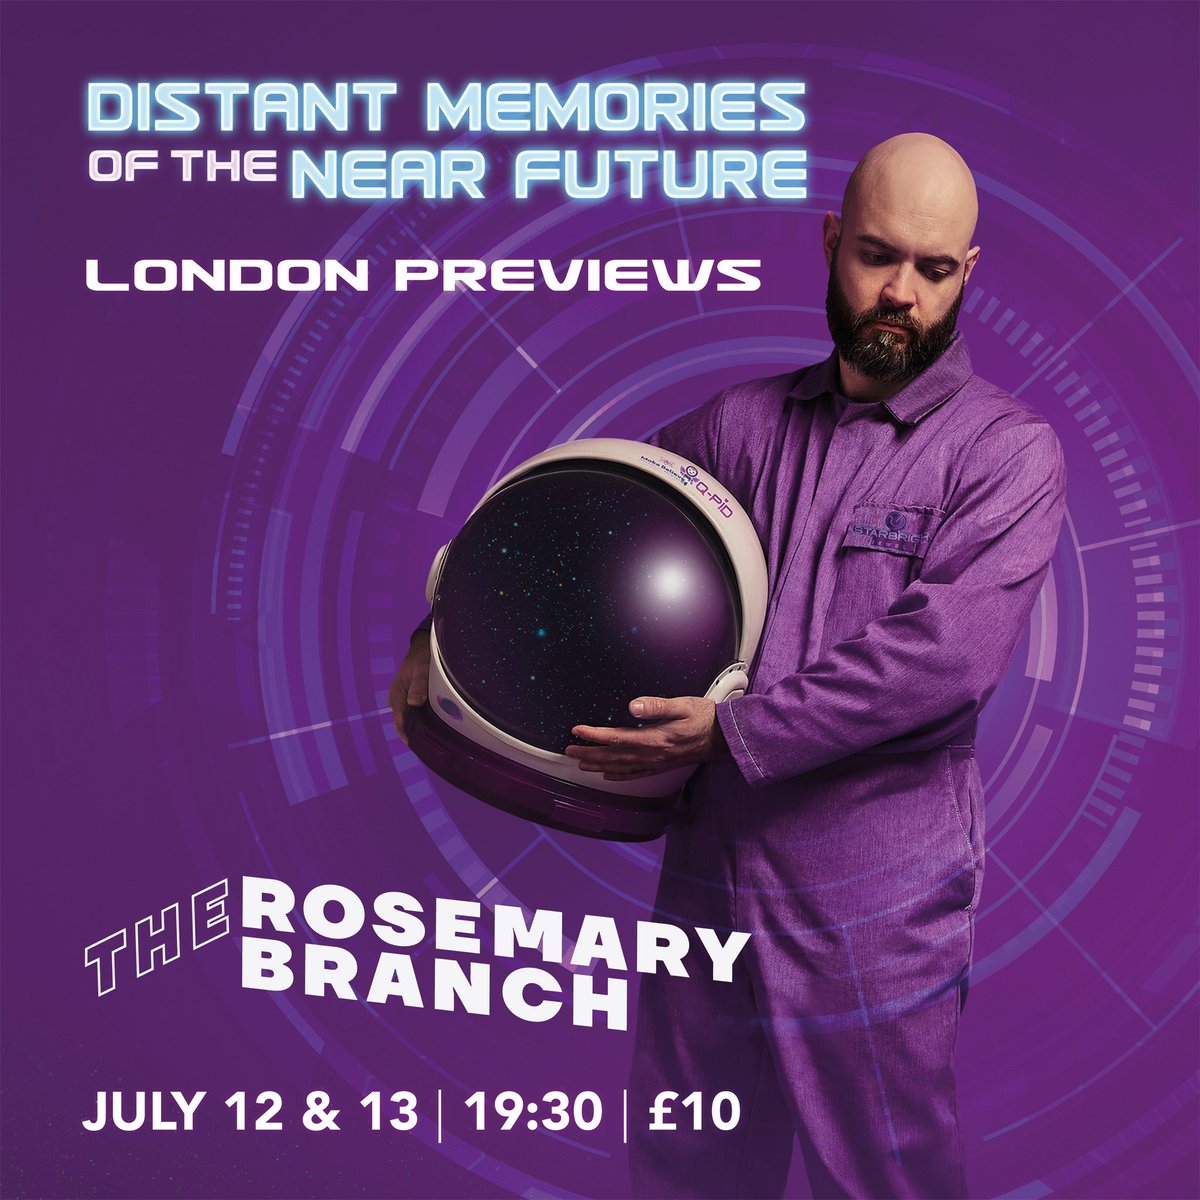 💜👩🏼‍🚀 LONDON PREVIEWS 🚀💜 Distant Memories of the Near Future is on stage for the first time ever next week at the @RosieBTheatre - stories about love, technology and being human. Ticket link is in bio. Come along! #theatre #londontheatre #fringetheatre #edfringepreviews